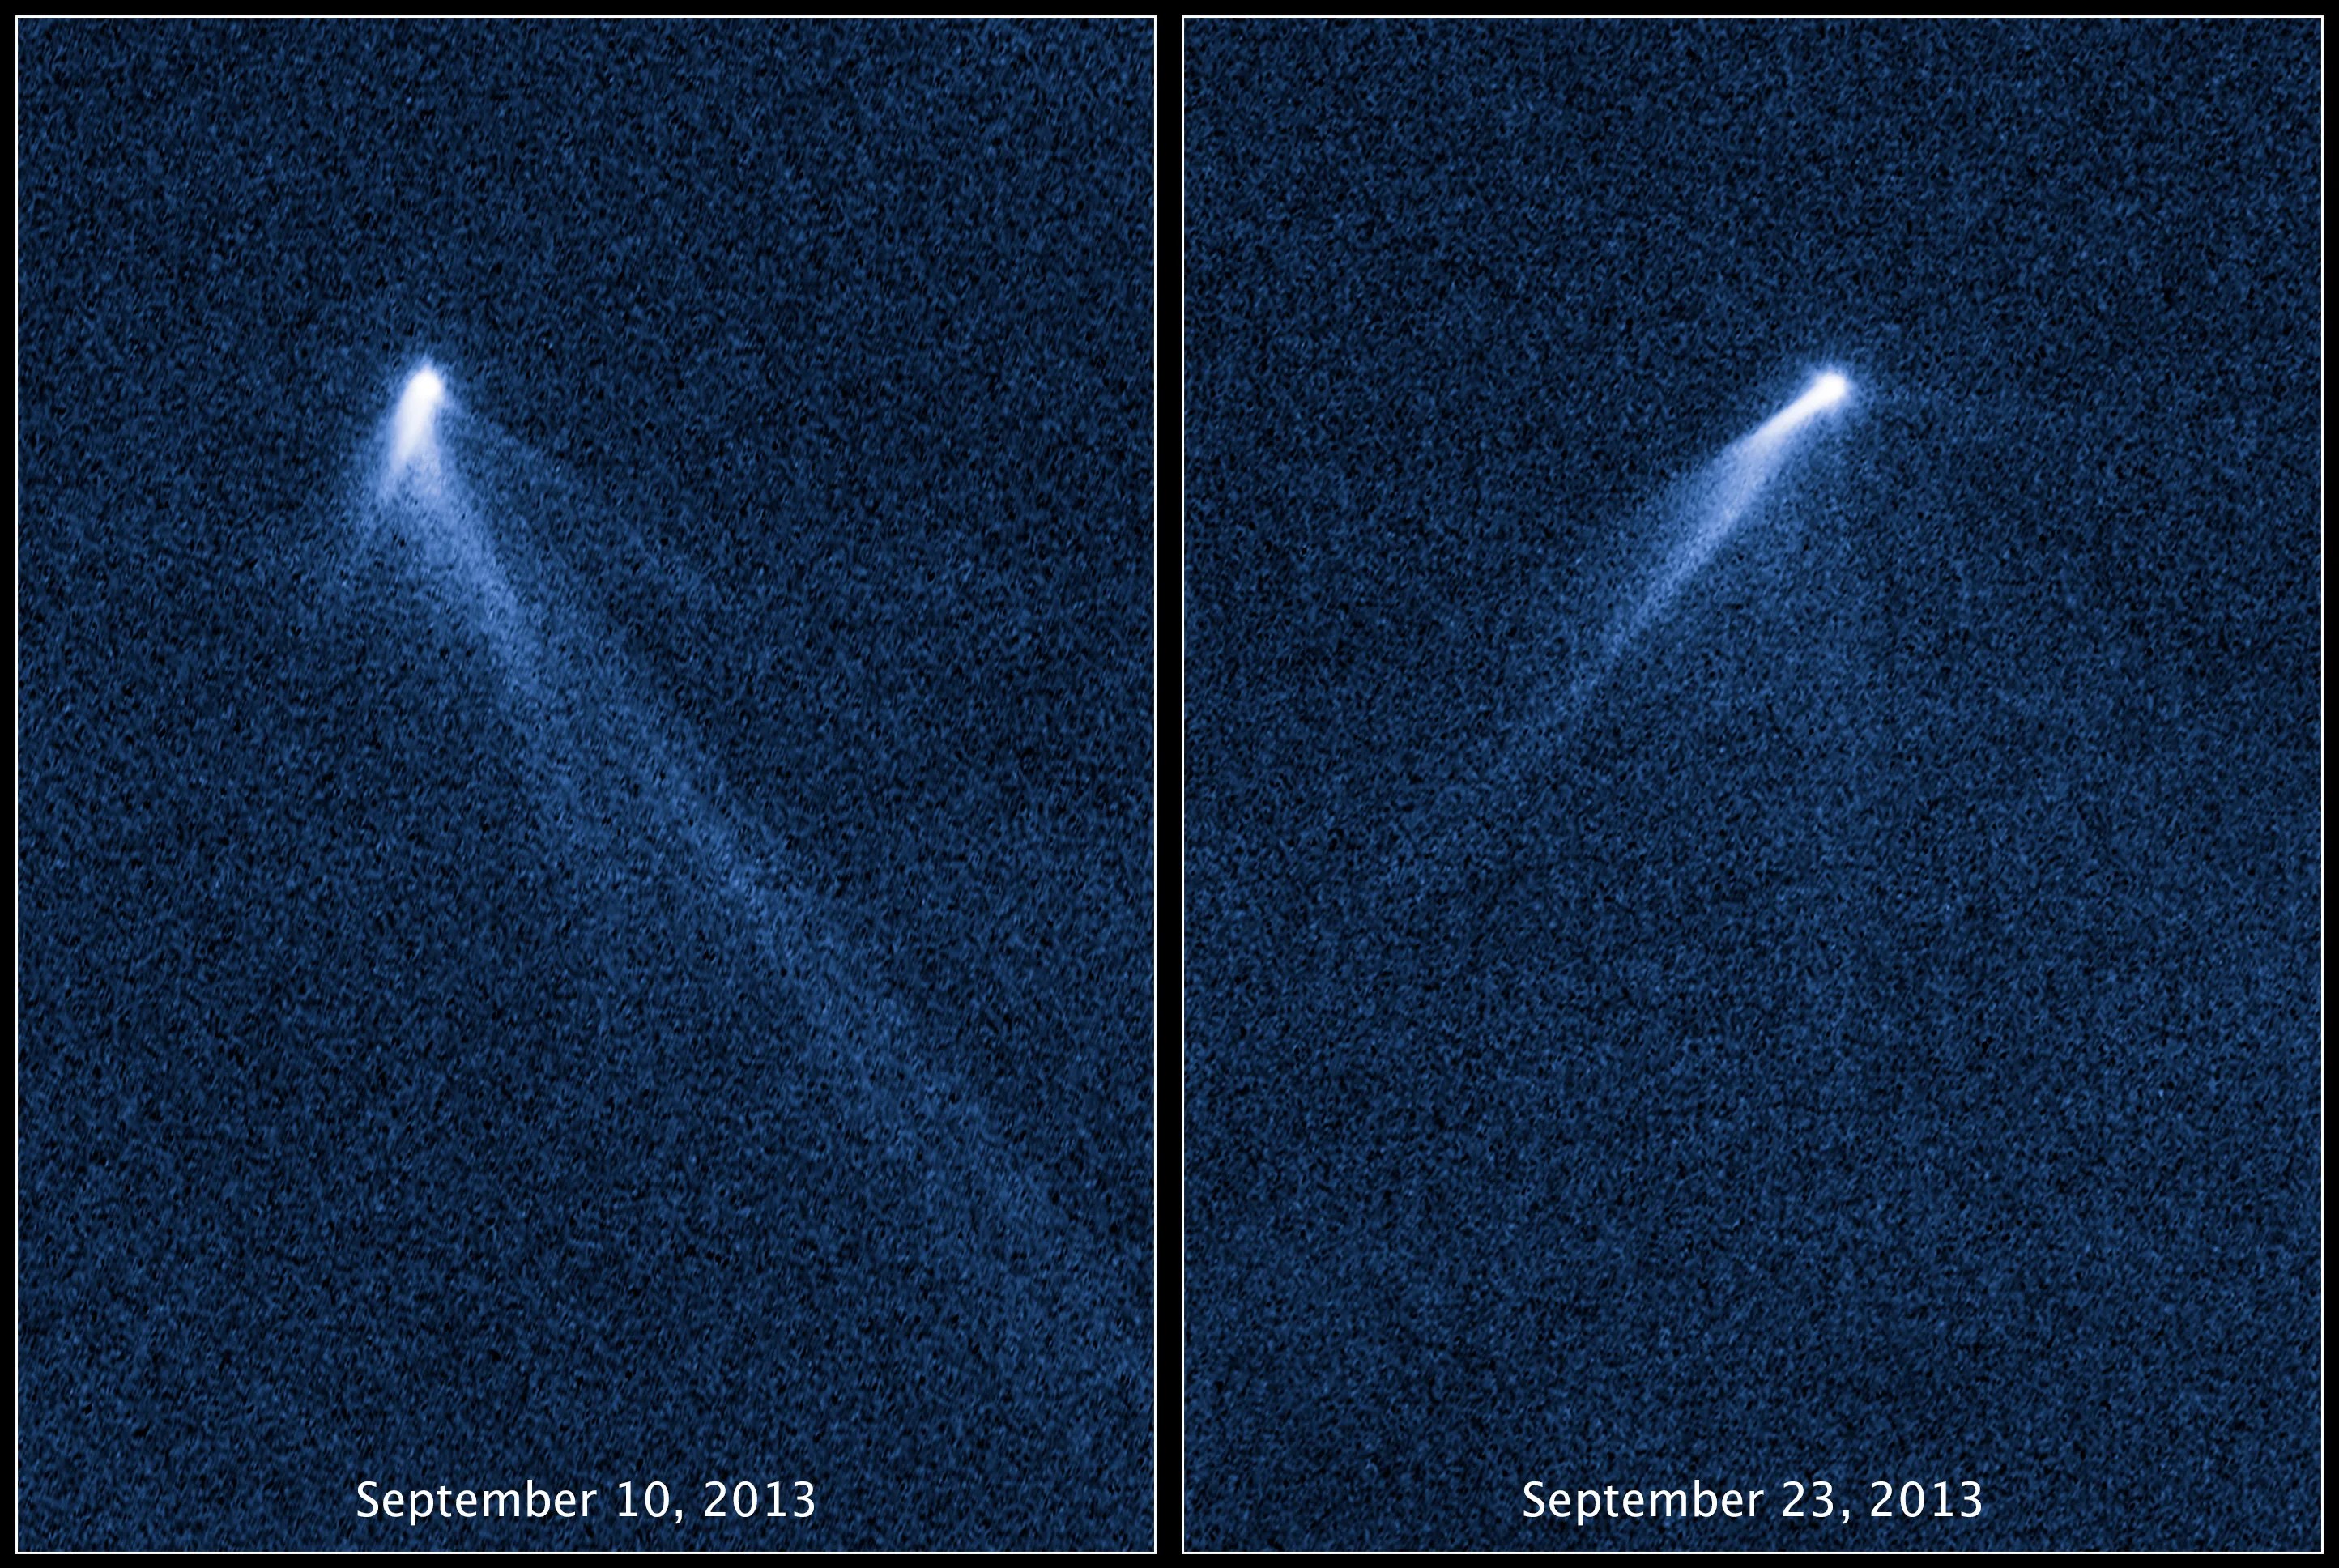 Hubble images of asteroid P/2013 P5